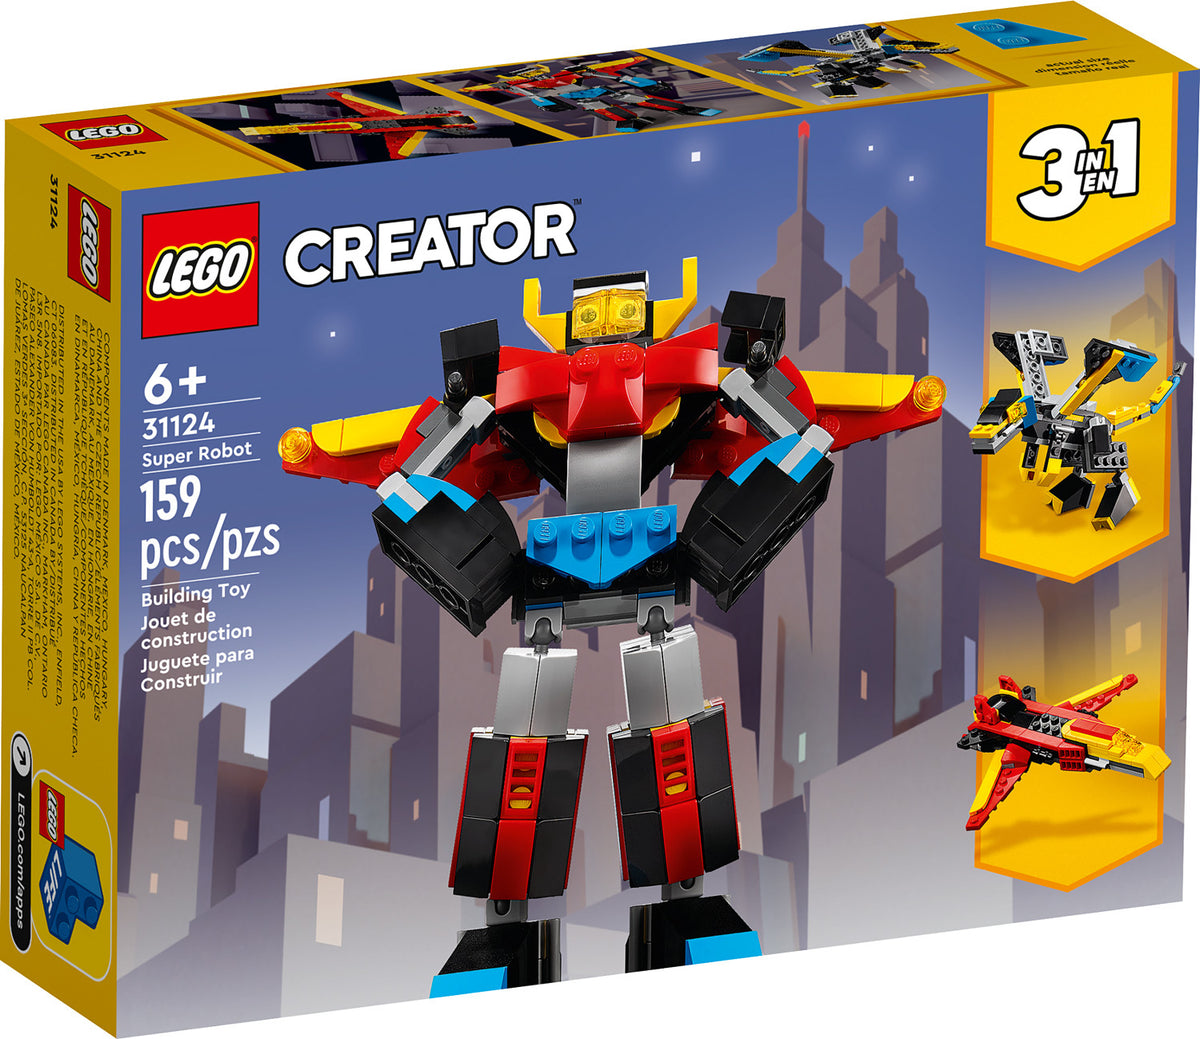 Retro Roller Skate 31148 | Creator 3-in-1 | Buy online at the Official  LEGO® Shop US